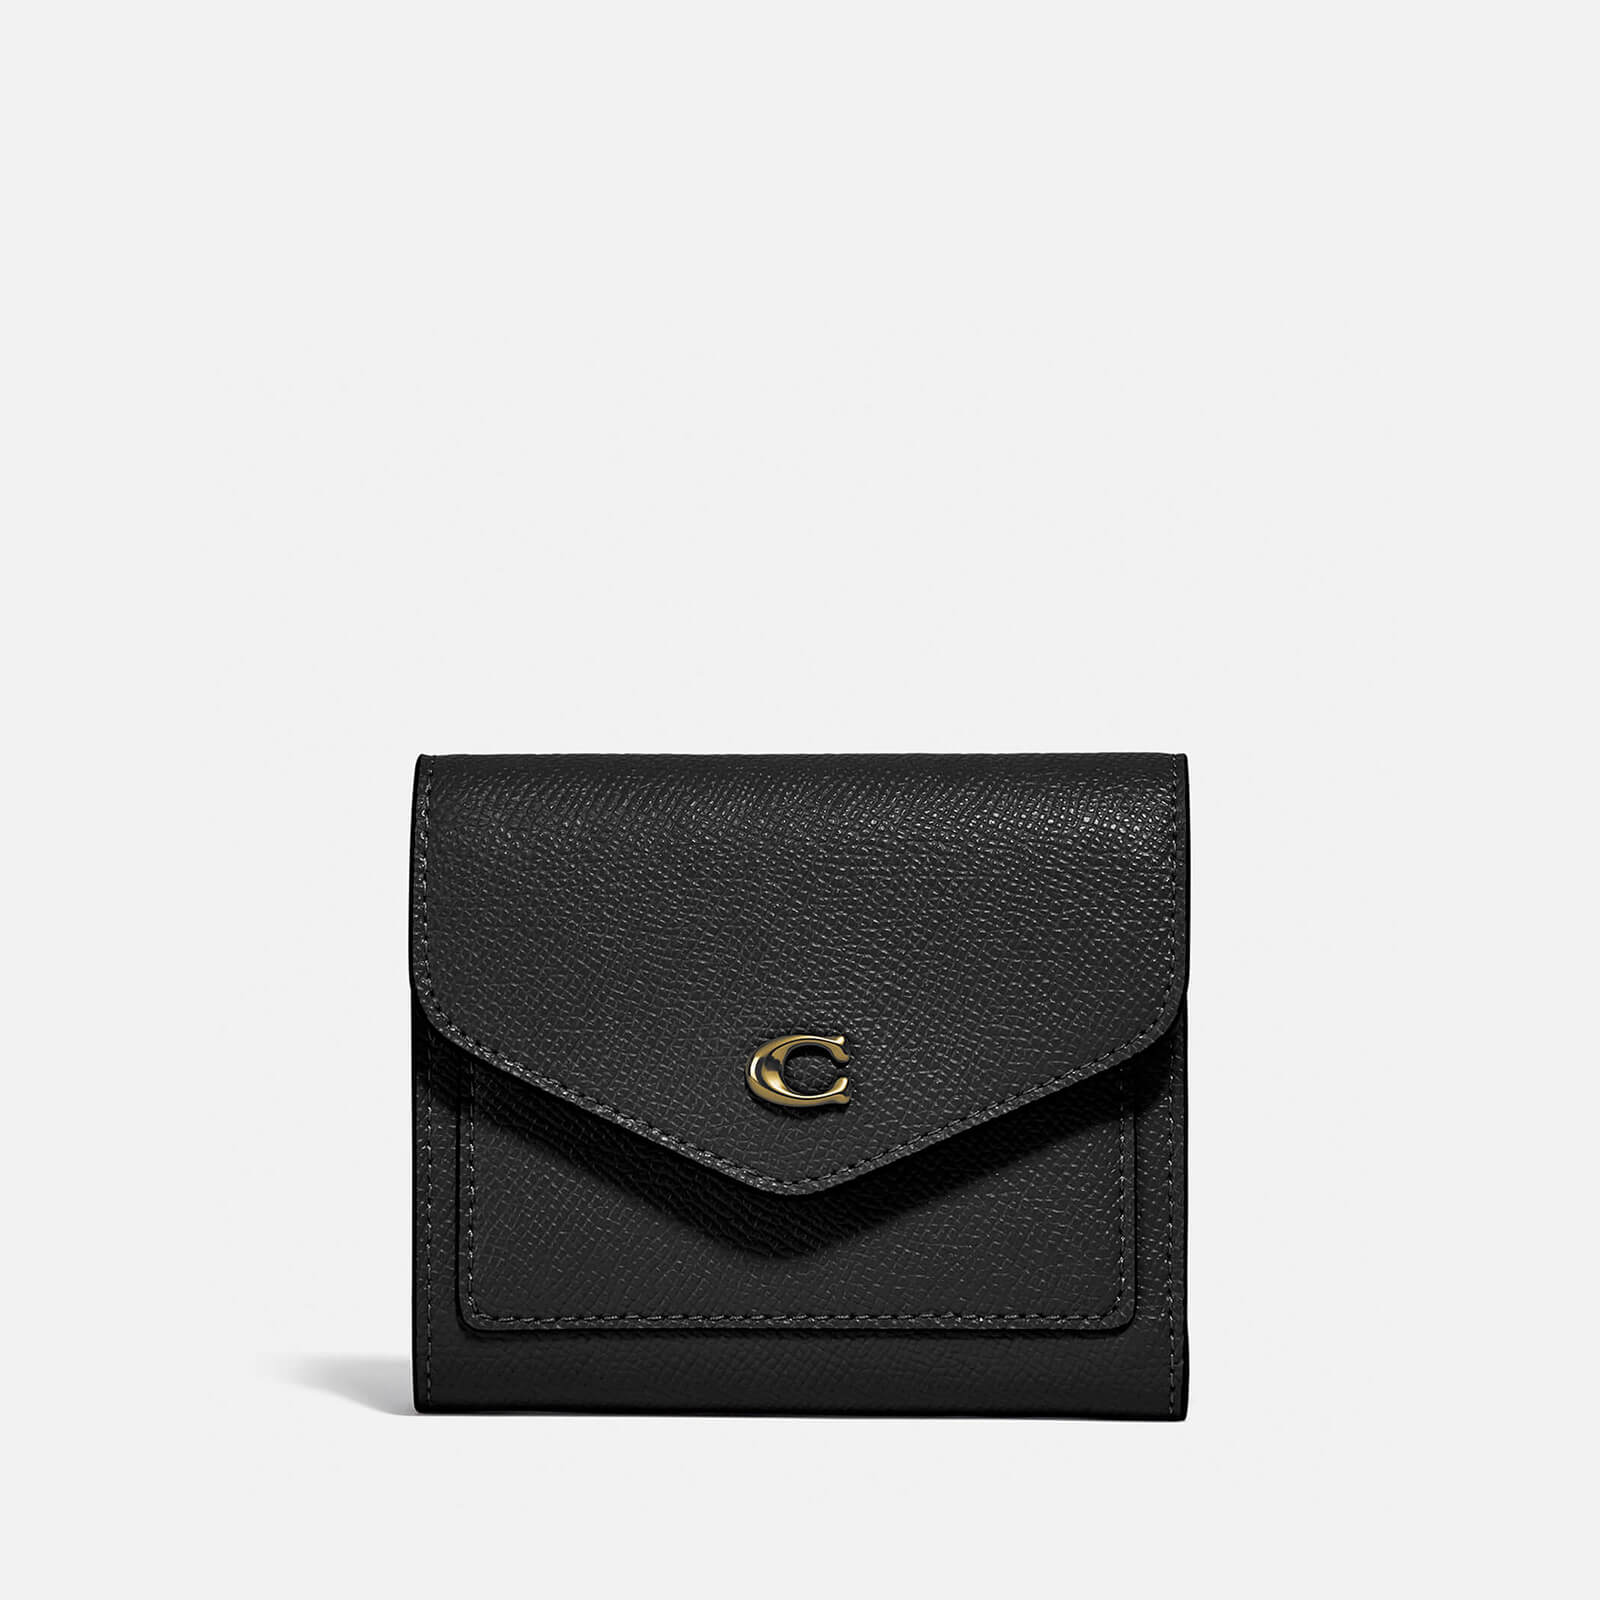 Image of Coach Crossgrain Leather Small Wallet - Black